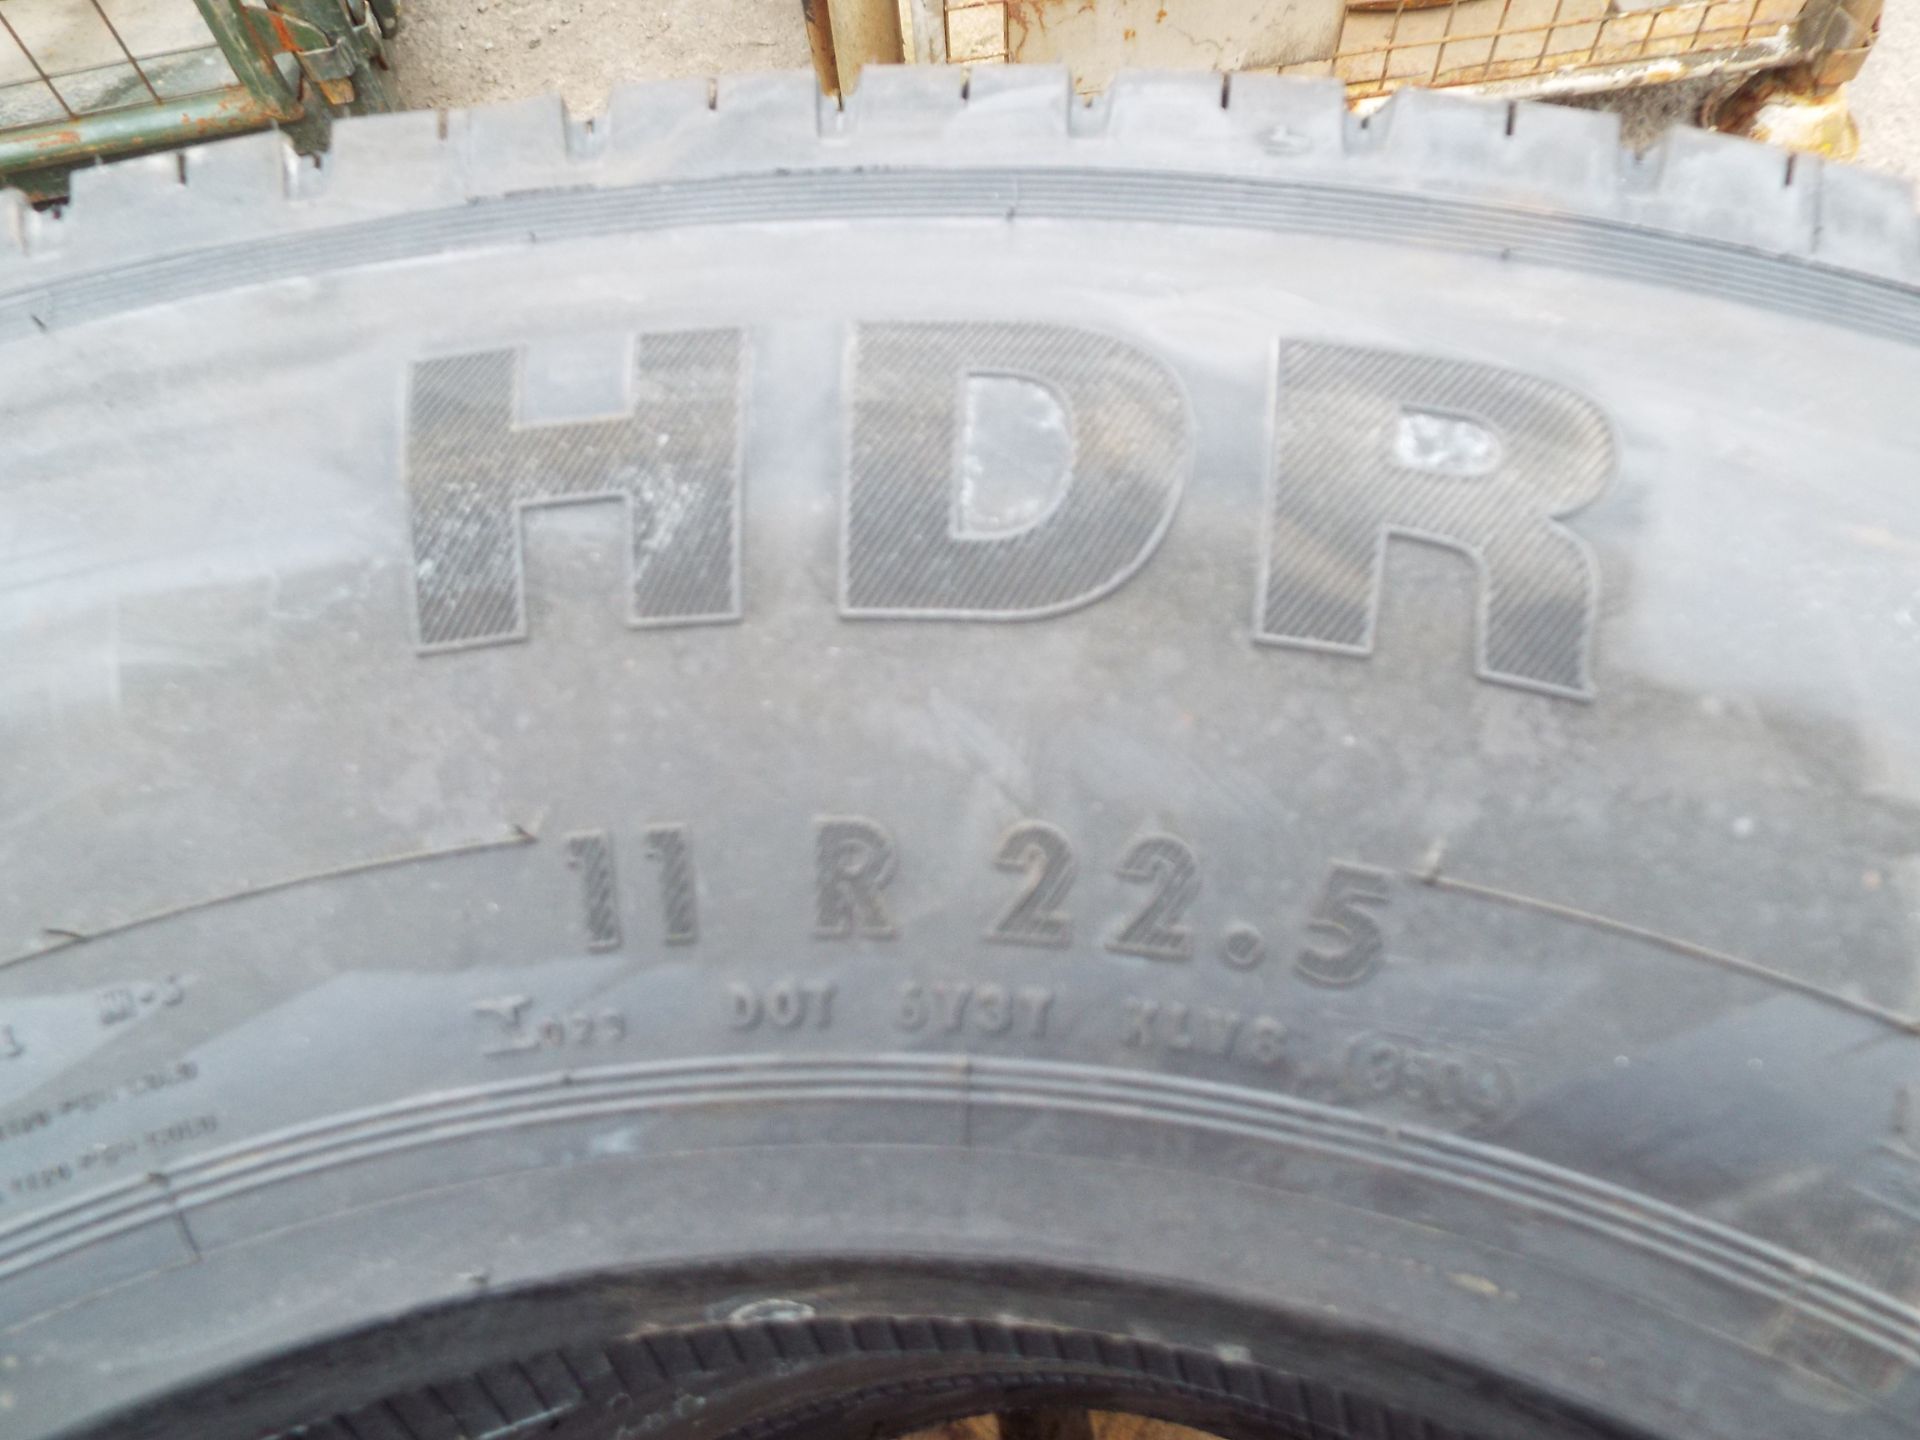 3 x Continental HDR 11 R 22.5 Tyres - Image 3 of 5